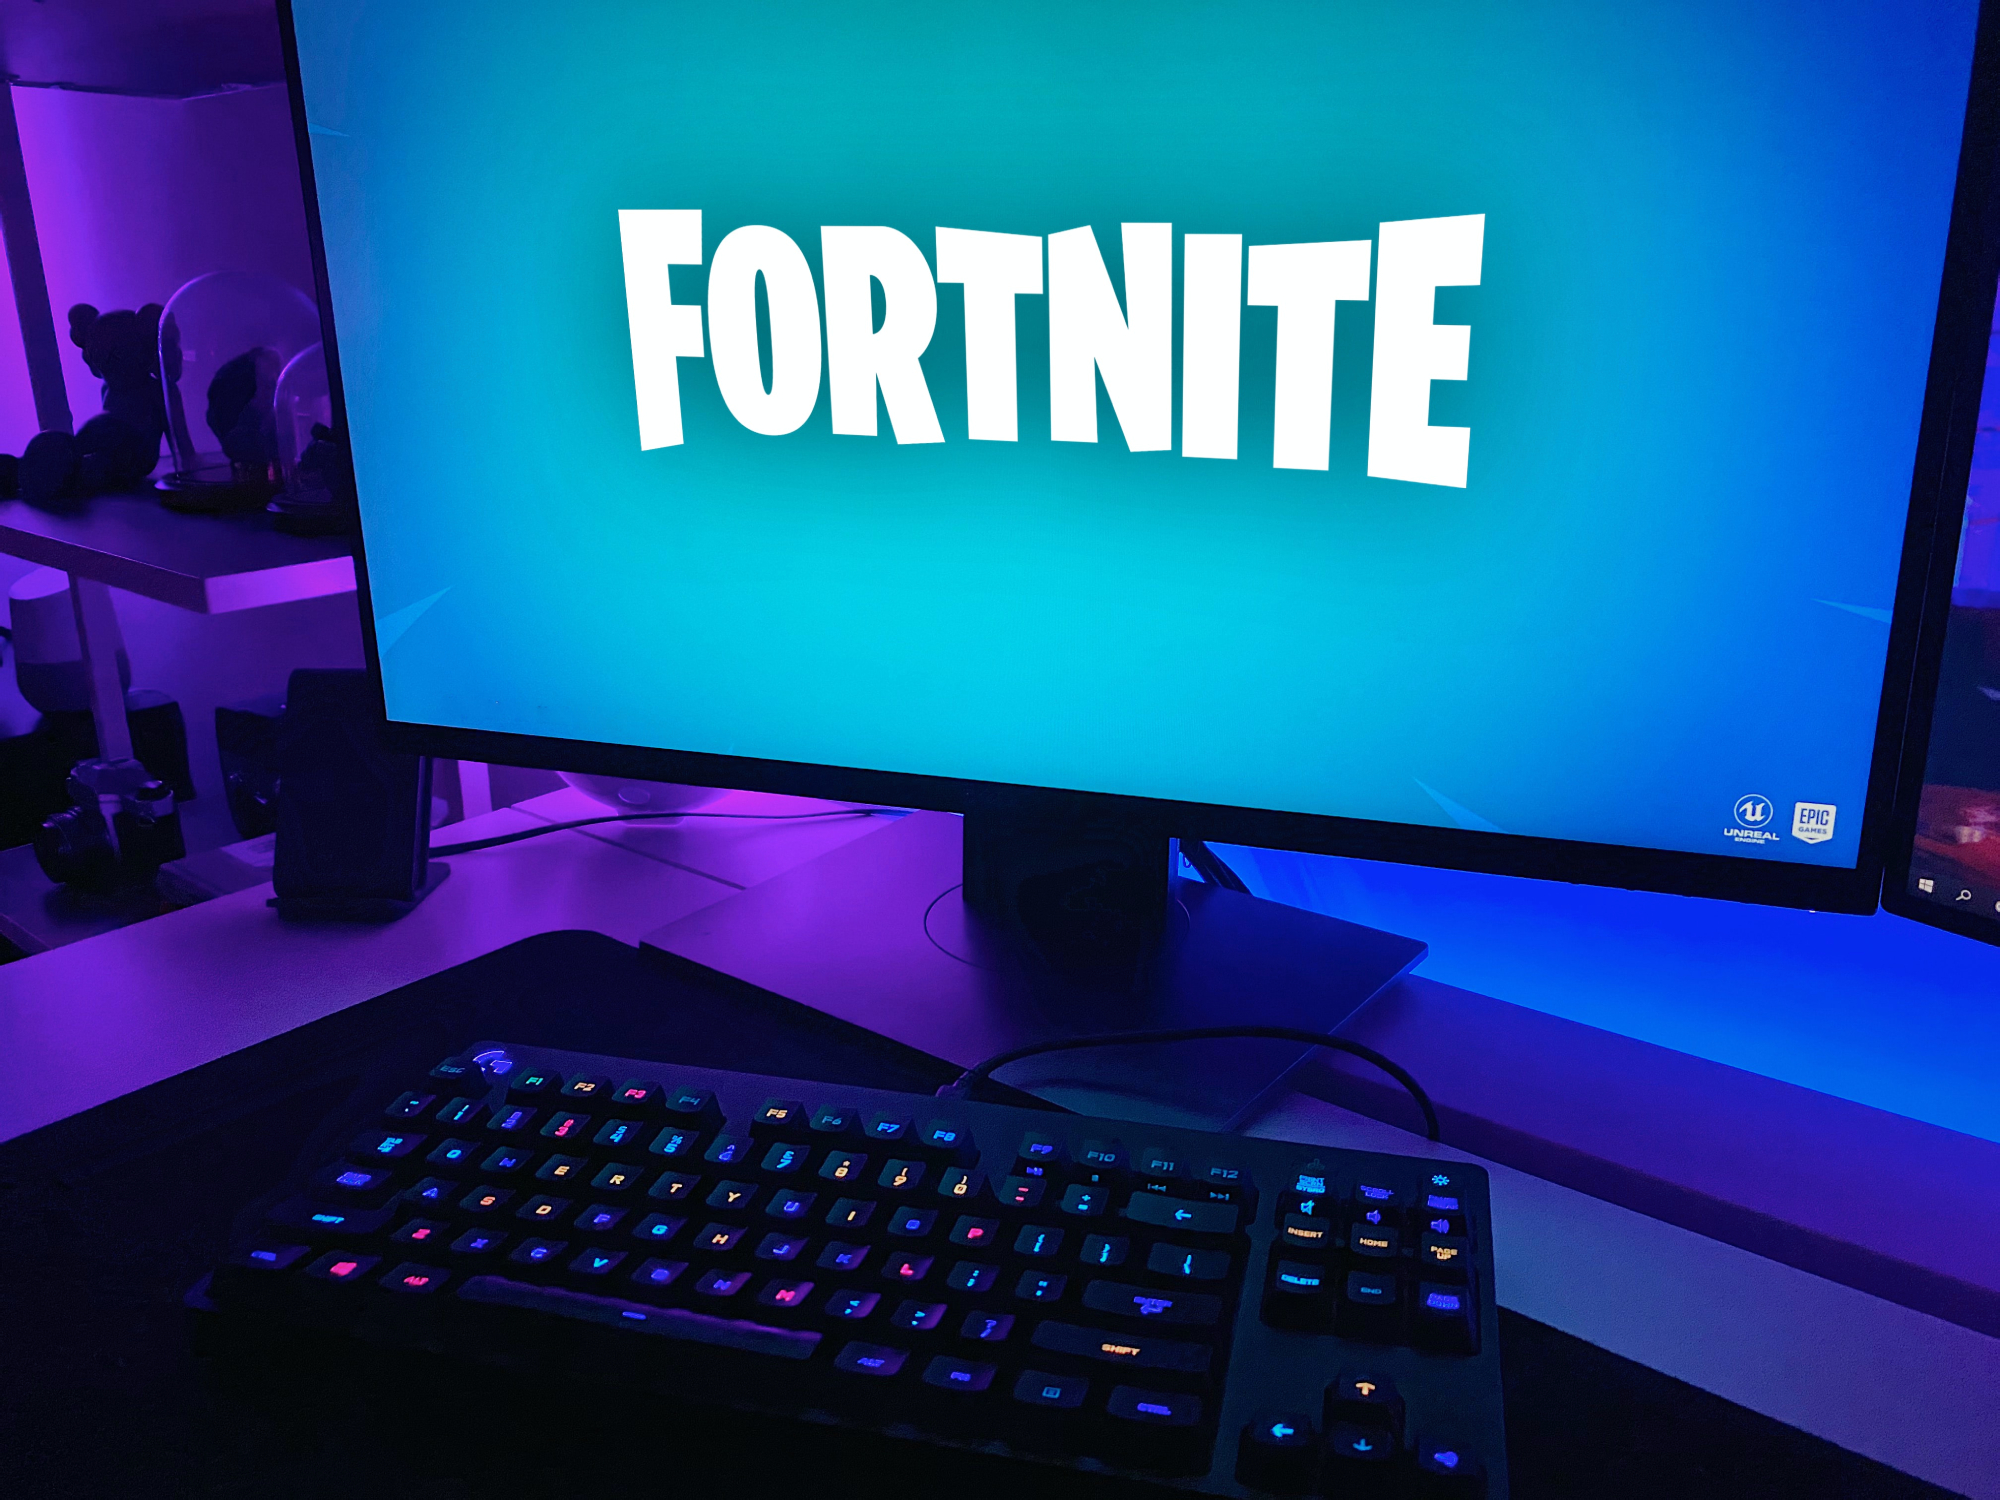 How to Play FORTNITE on the Xbox 360!! (Trick Your Friends) 